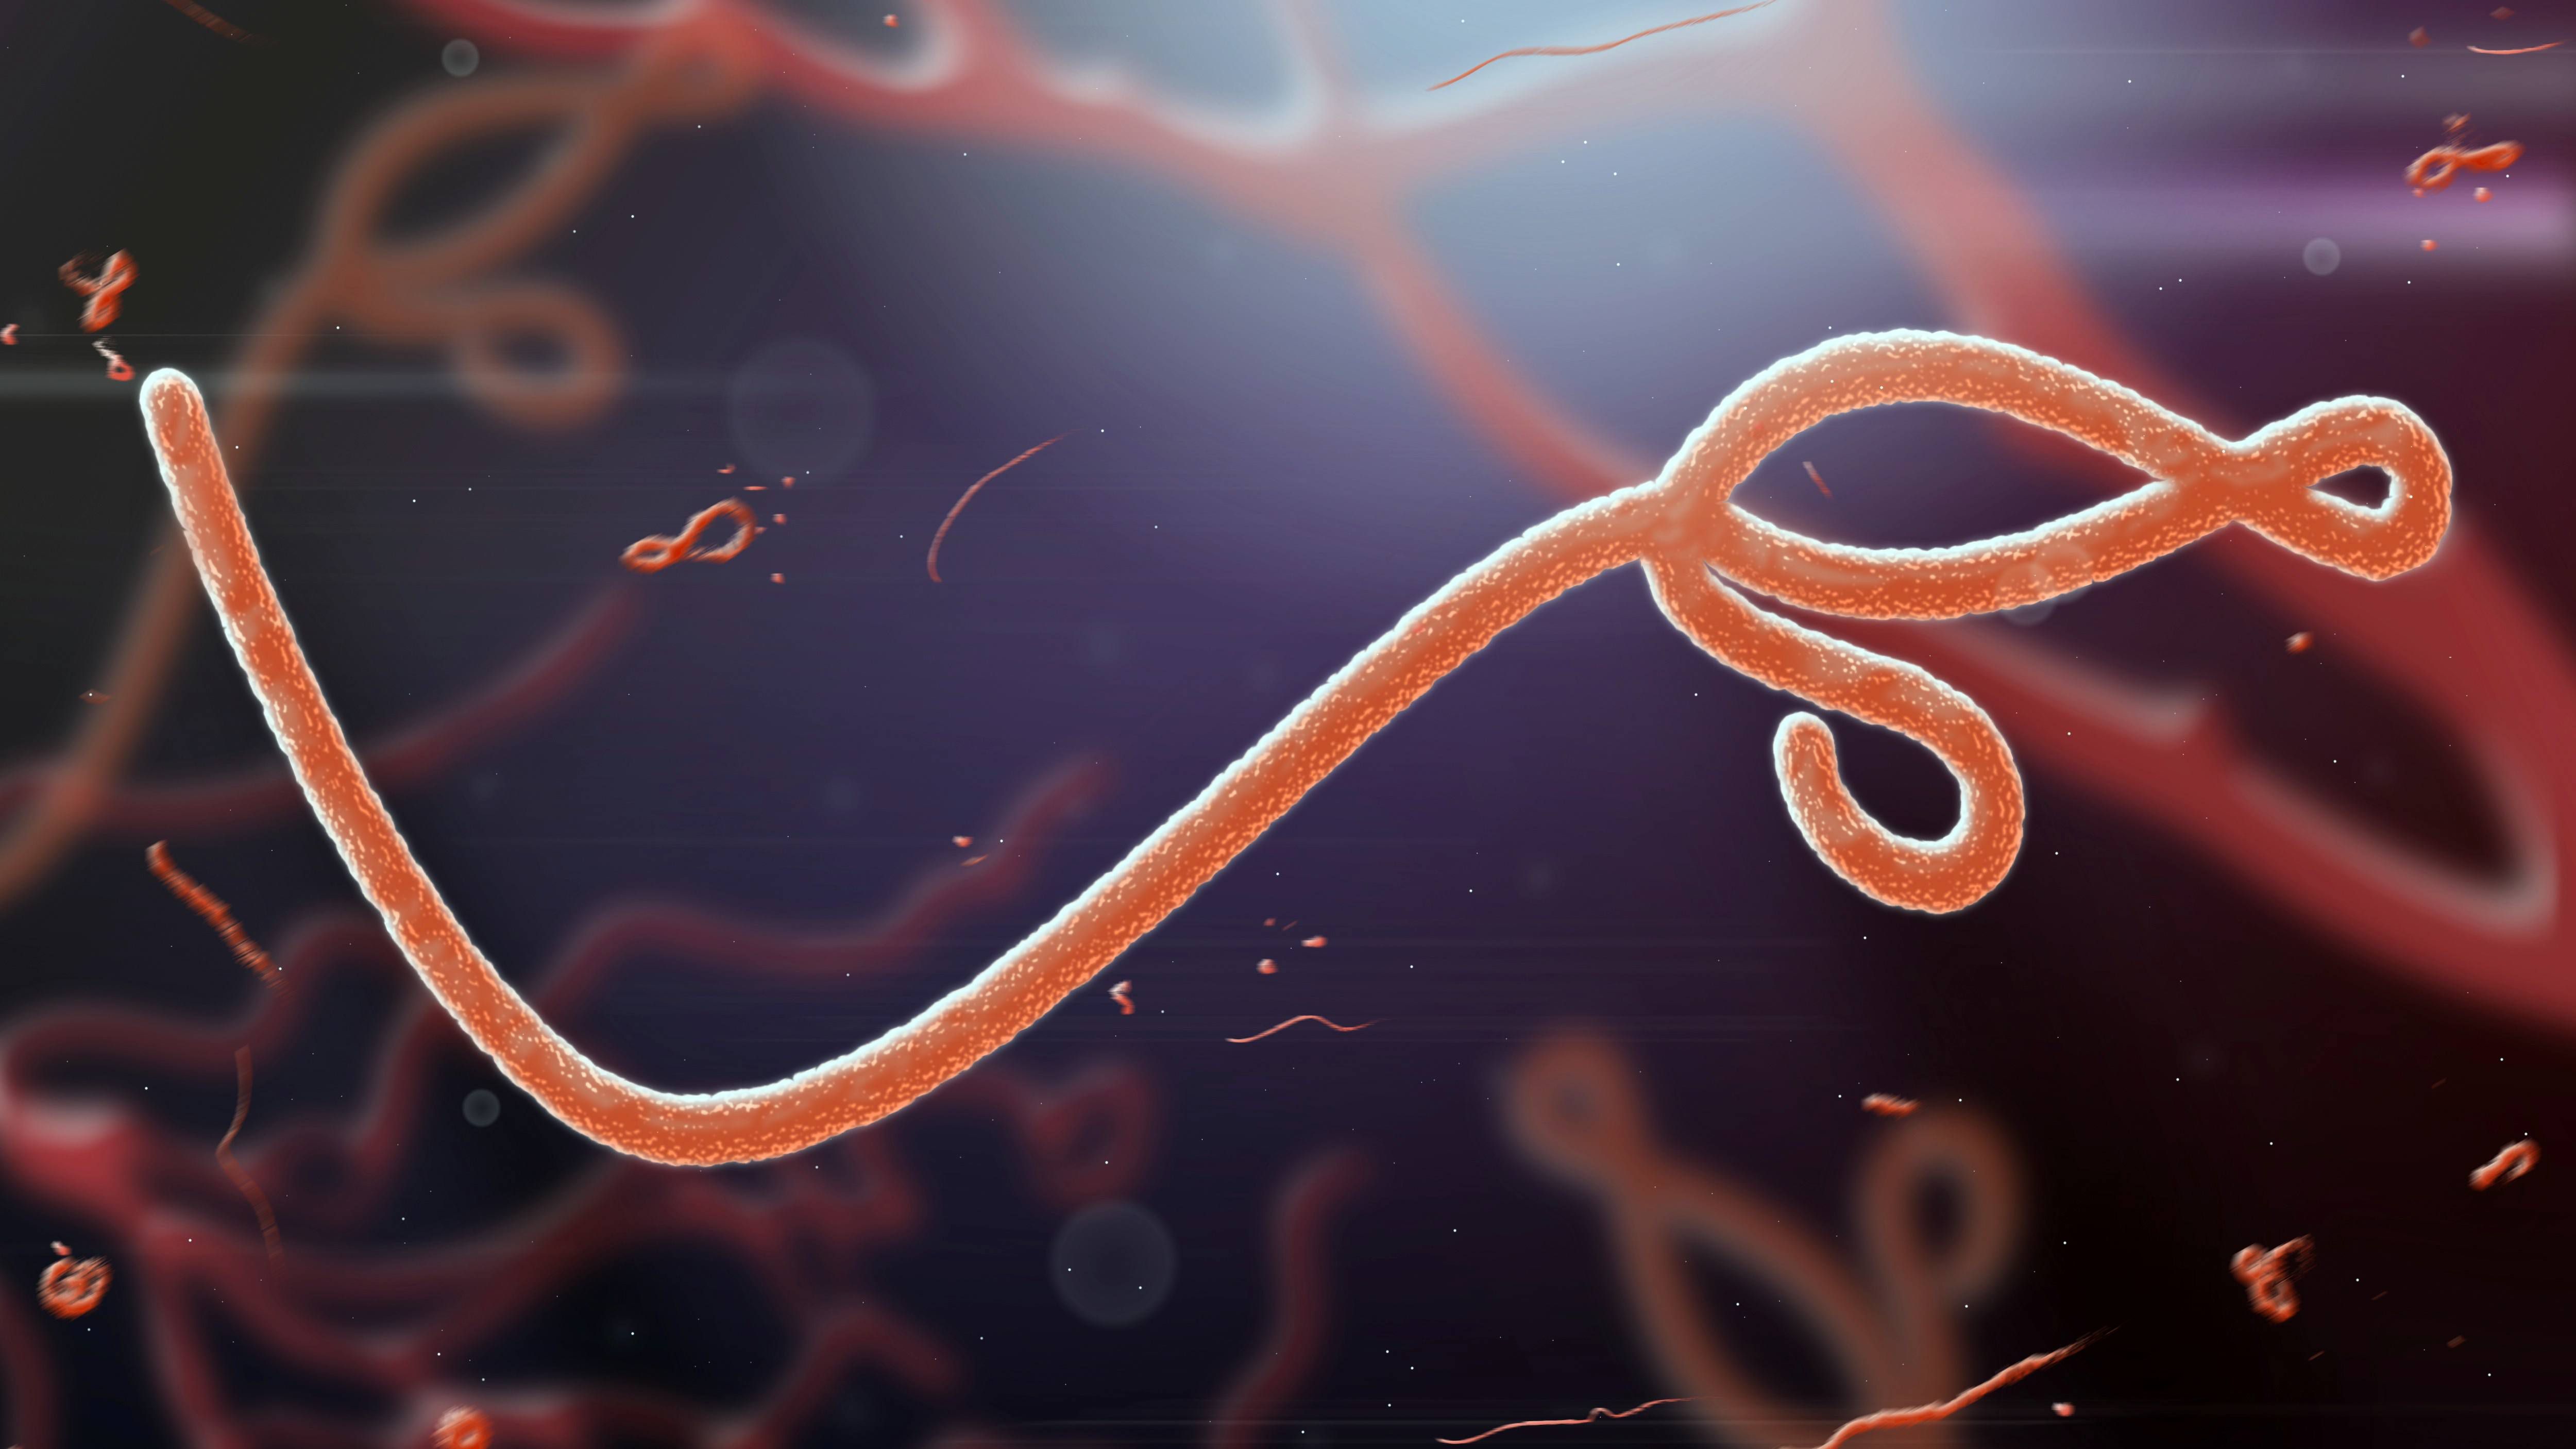 Top Six Diseases Should Worry You More Than Ebola